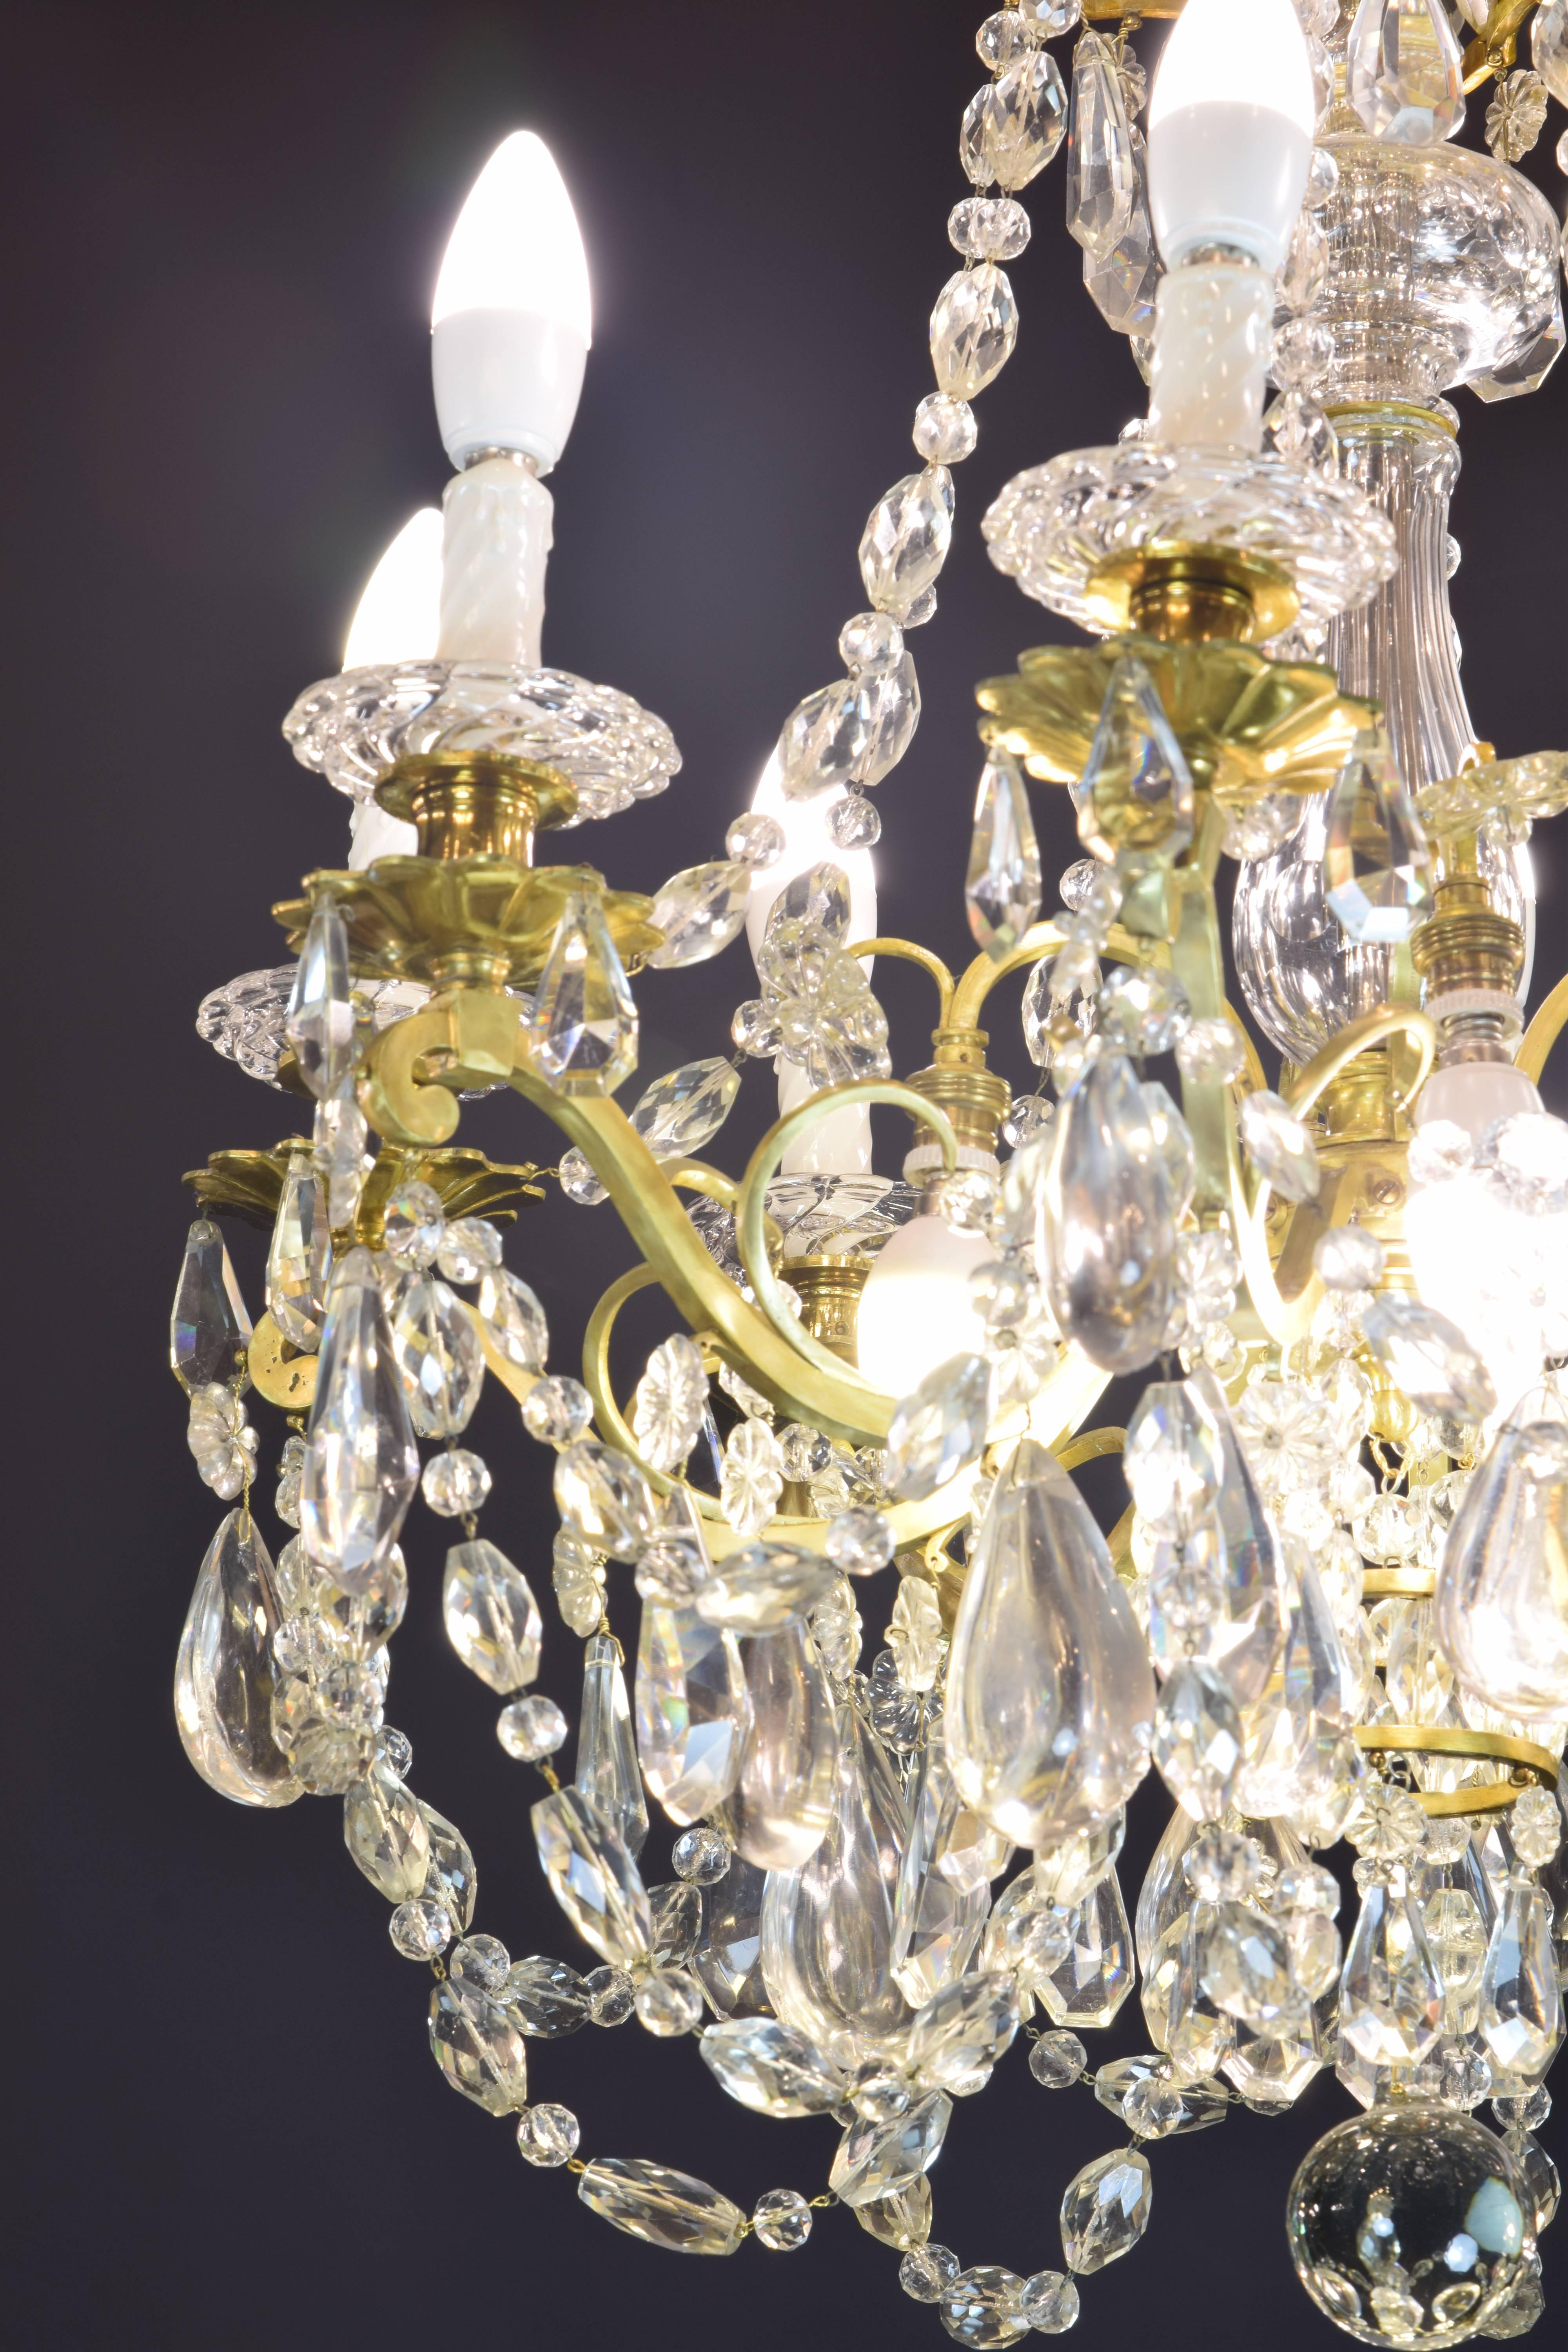 Baccarat signed chandelier. Glass and gilt bronze, 19th century.
Gilt bronze and transparent glass chandelier with eight lights. The upper part has a series of curved sticks from which hang some glass beads in various shapes (flower, tear). The